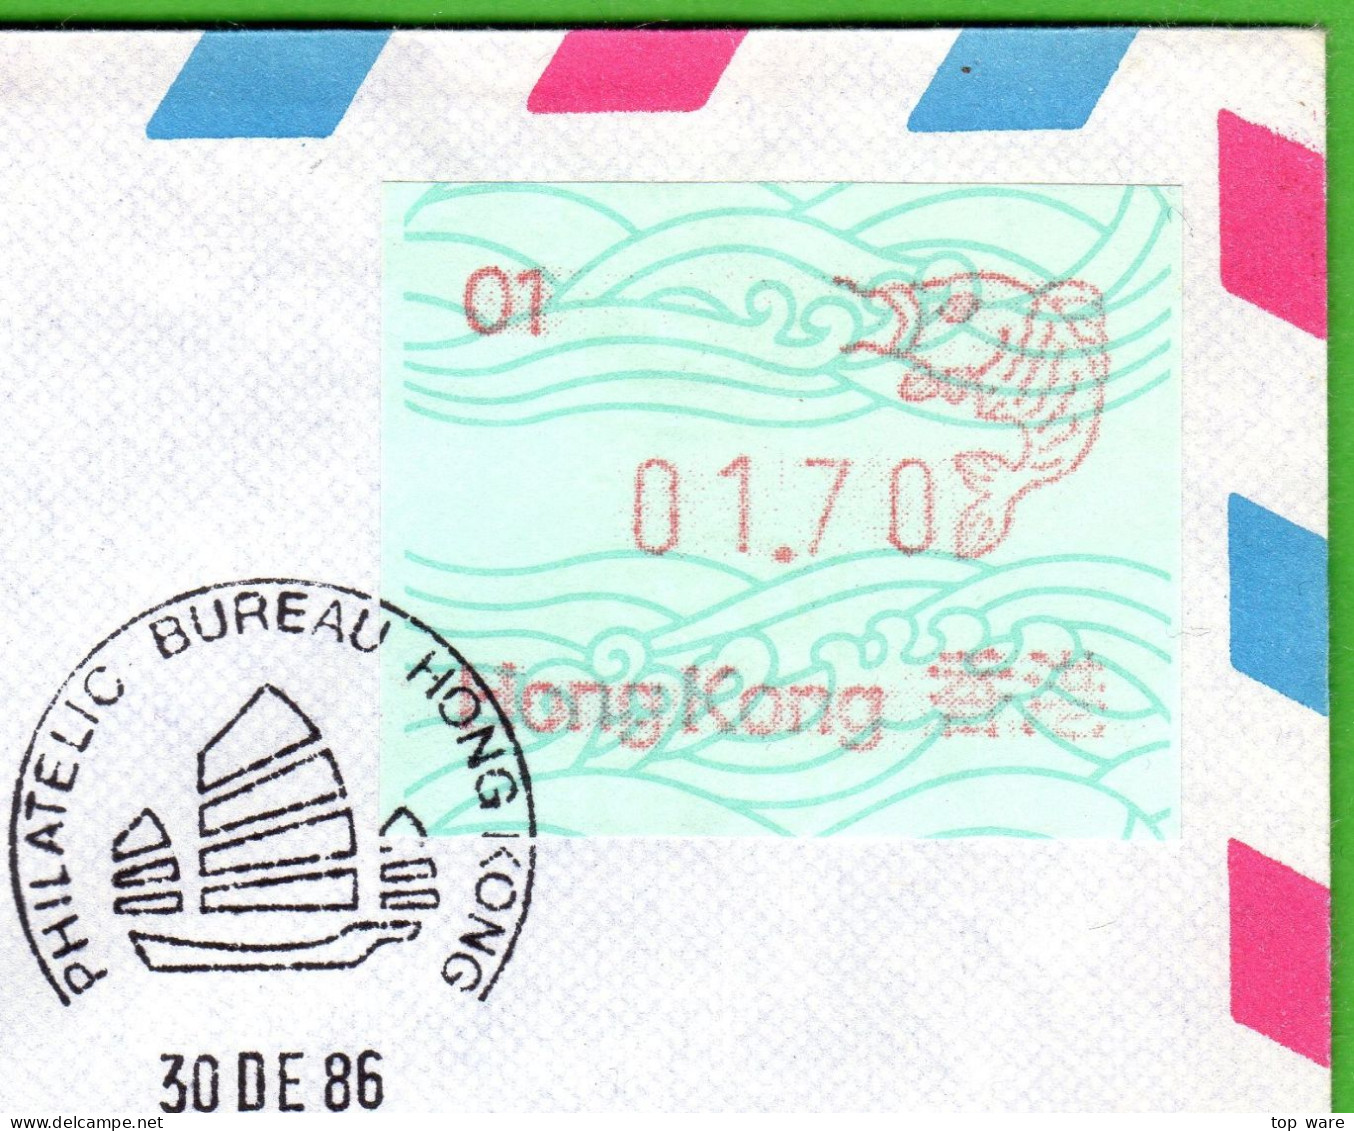 Hong Kong China ATM 1 Brown-red / Carp Fish / FDC 1.70 Poste Restante 30 DE 86 To Portugal 25$0 Funchal 28.1.86 / Frama - Distribuidores